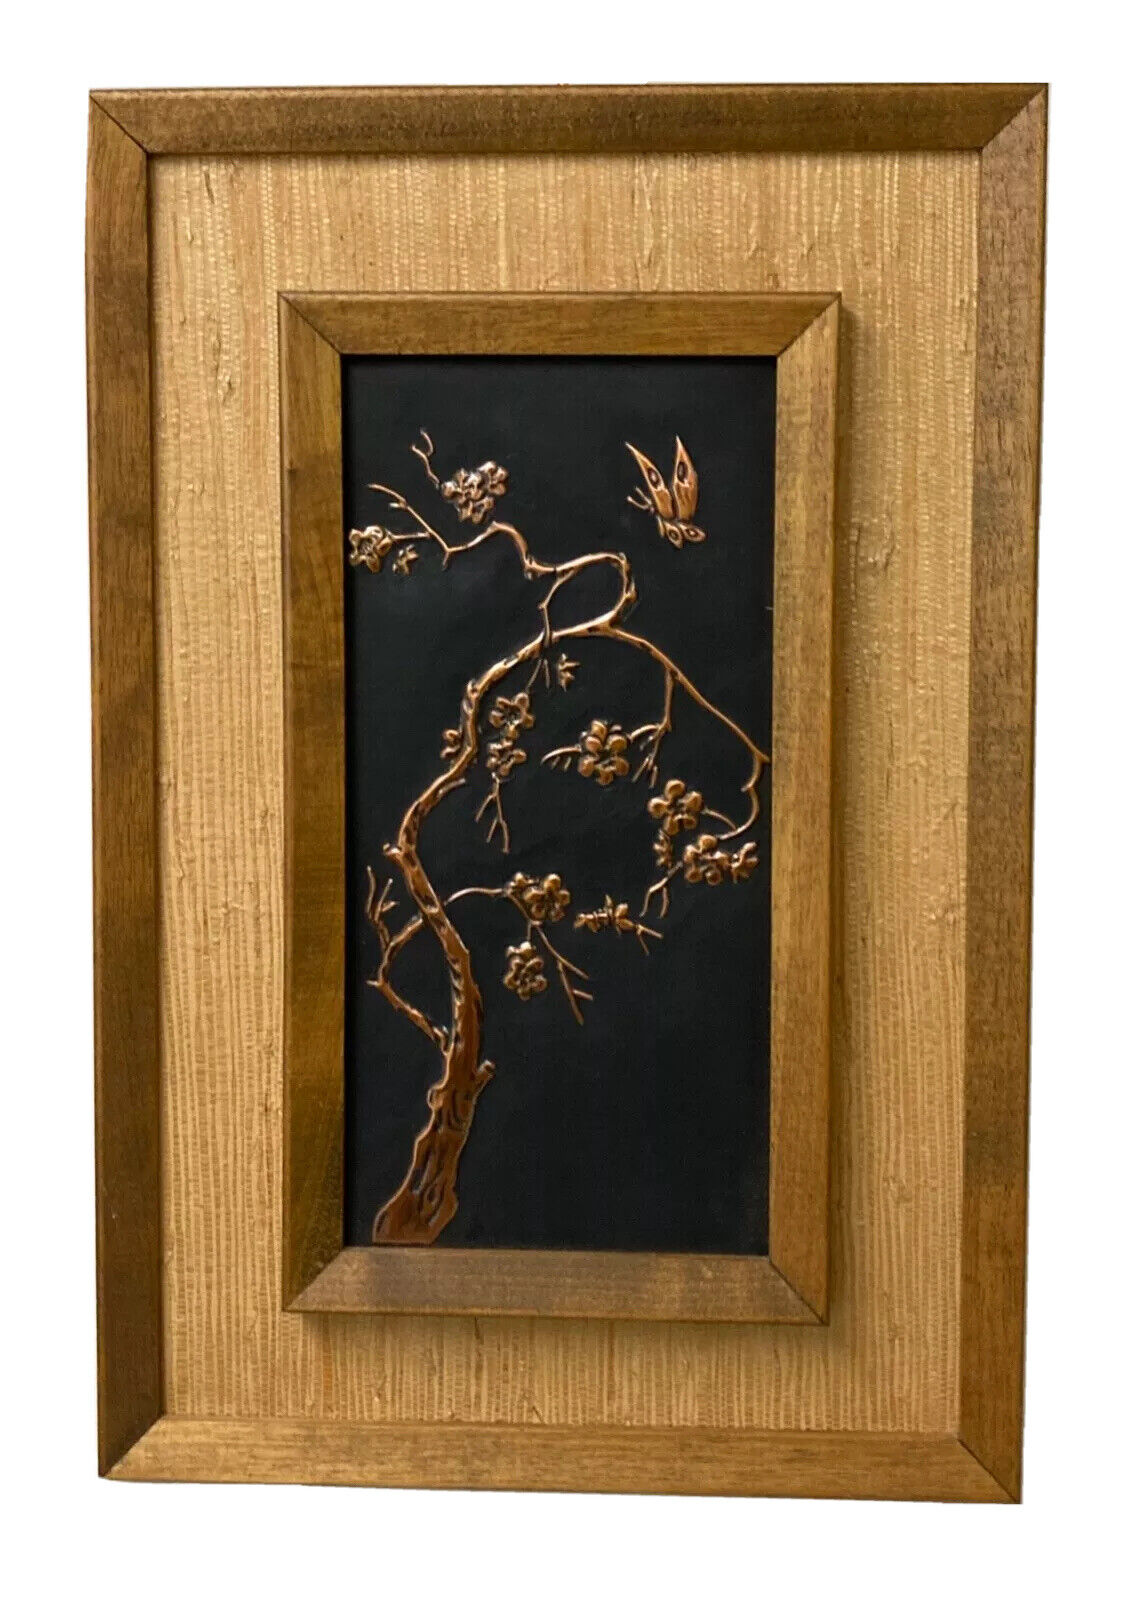 Copper Relief Wall Art Hand Tooled Mid Century Cherry Blossoms 1970's Retro Boho